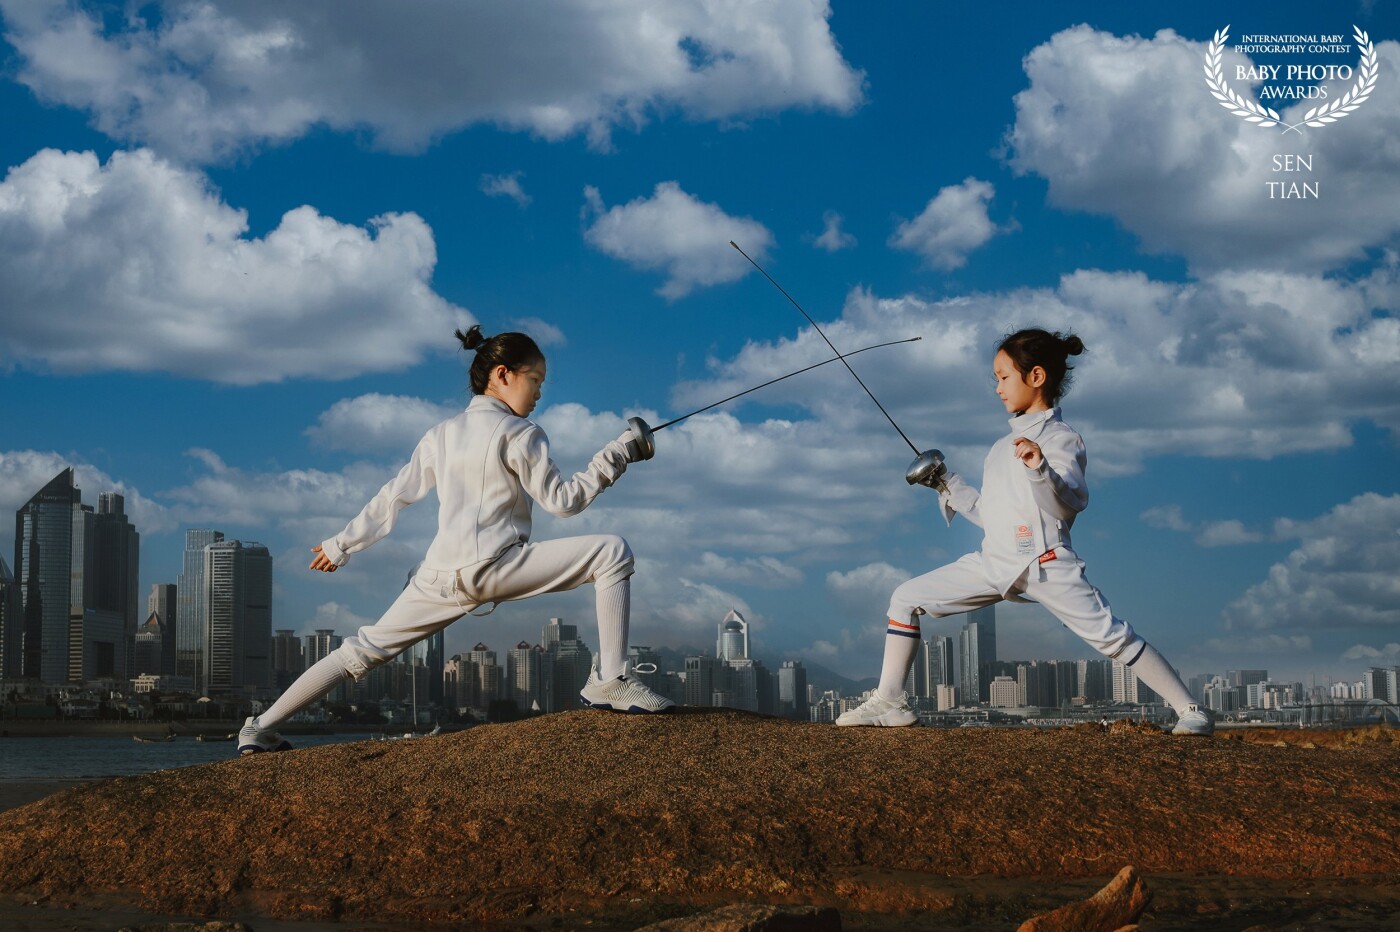 Fencing is an aristocratic sport. When the trainer wears a white fencing suit, a black helmet, and stands proudly with a long sword, a confident temperament arises spontaneously. One afternoon at the end of May, we came to this reef. The oblique sunlight illuminated the protagonist and took this picture with the city as the background.